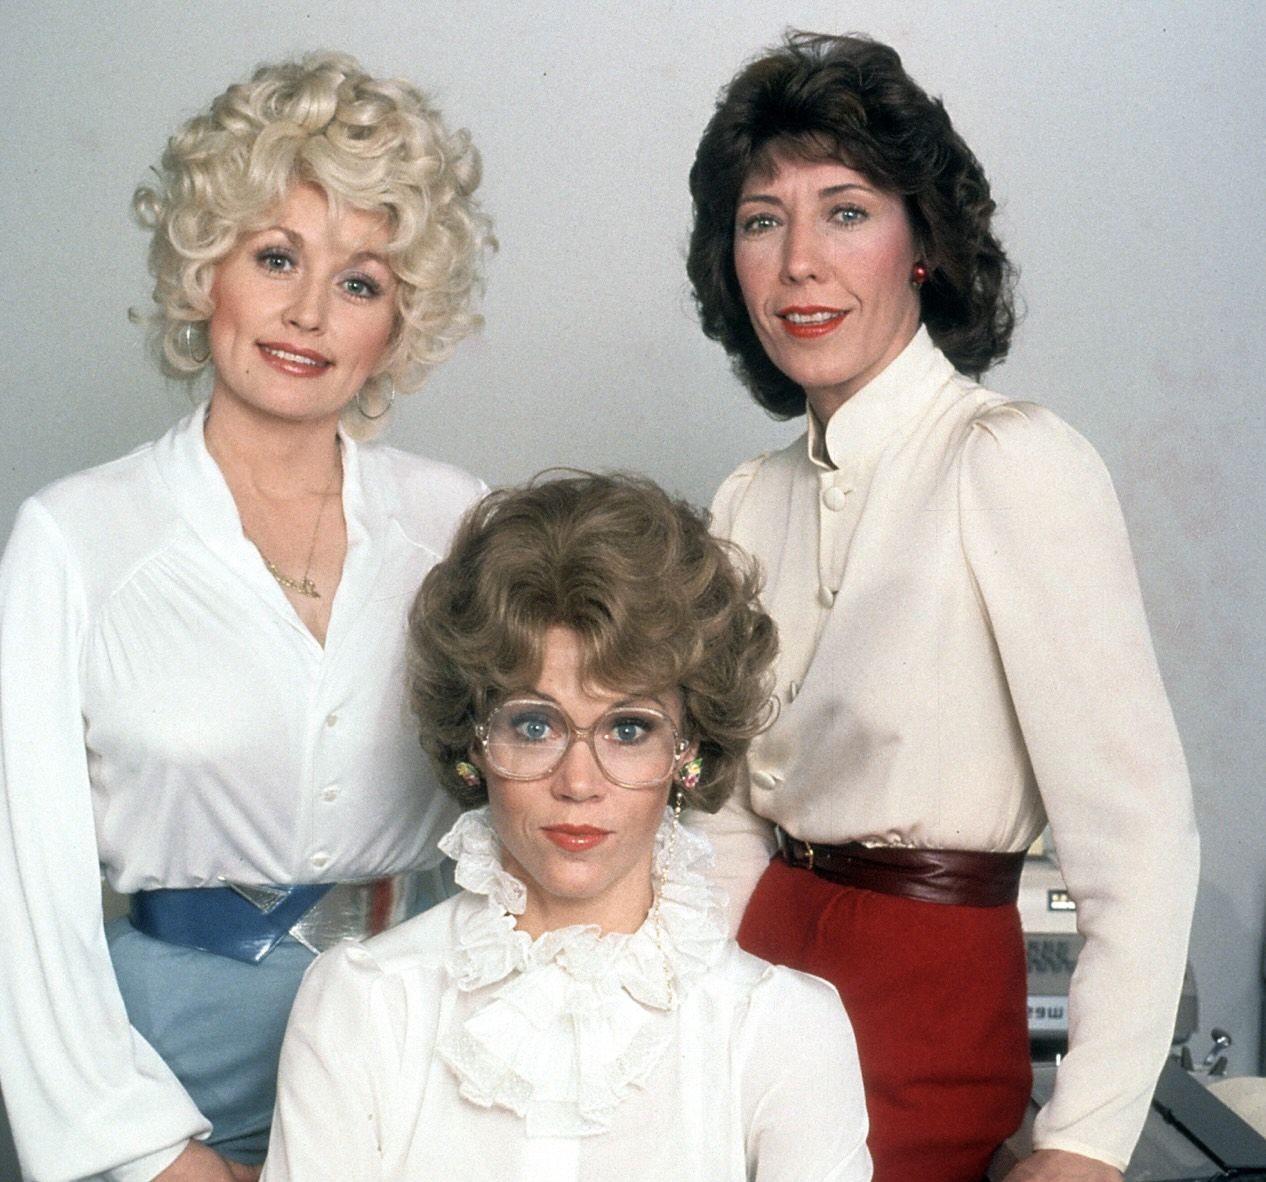 "9 to 5" from IMDB